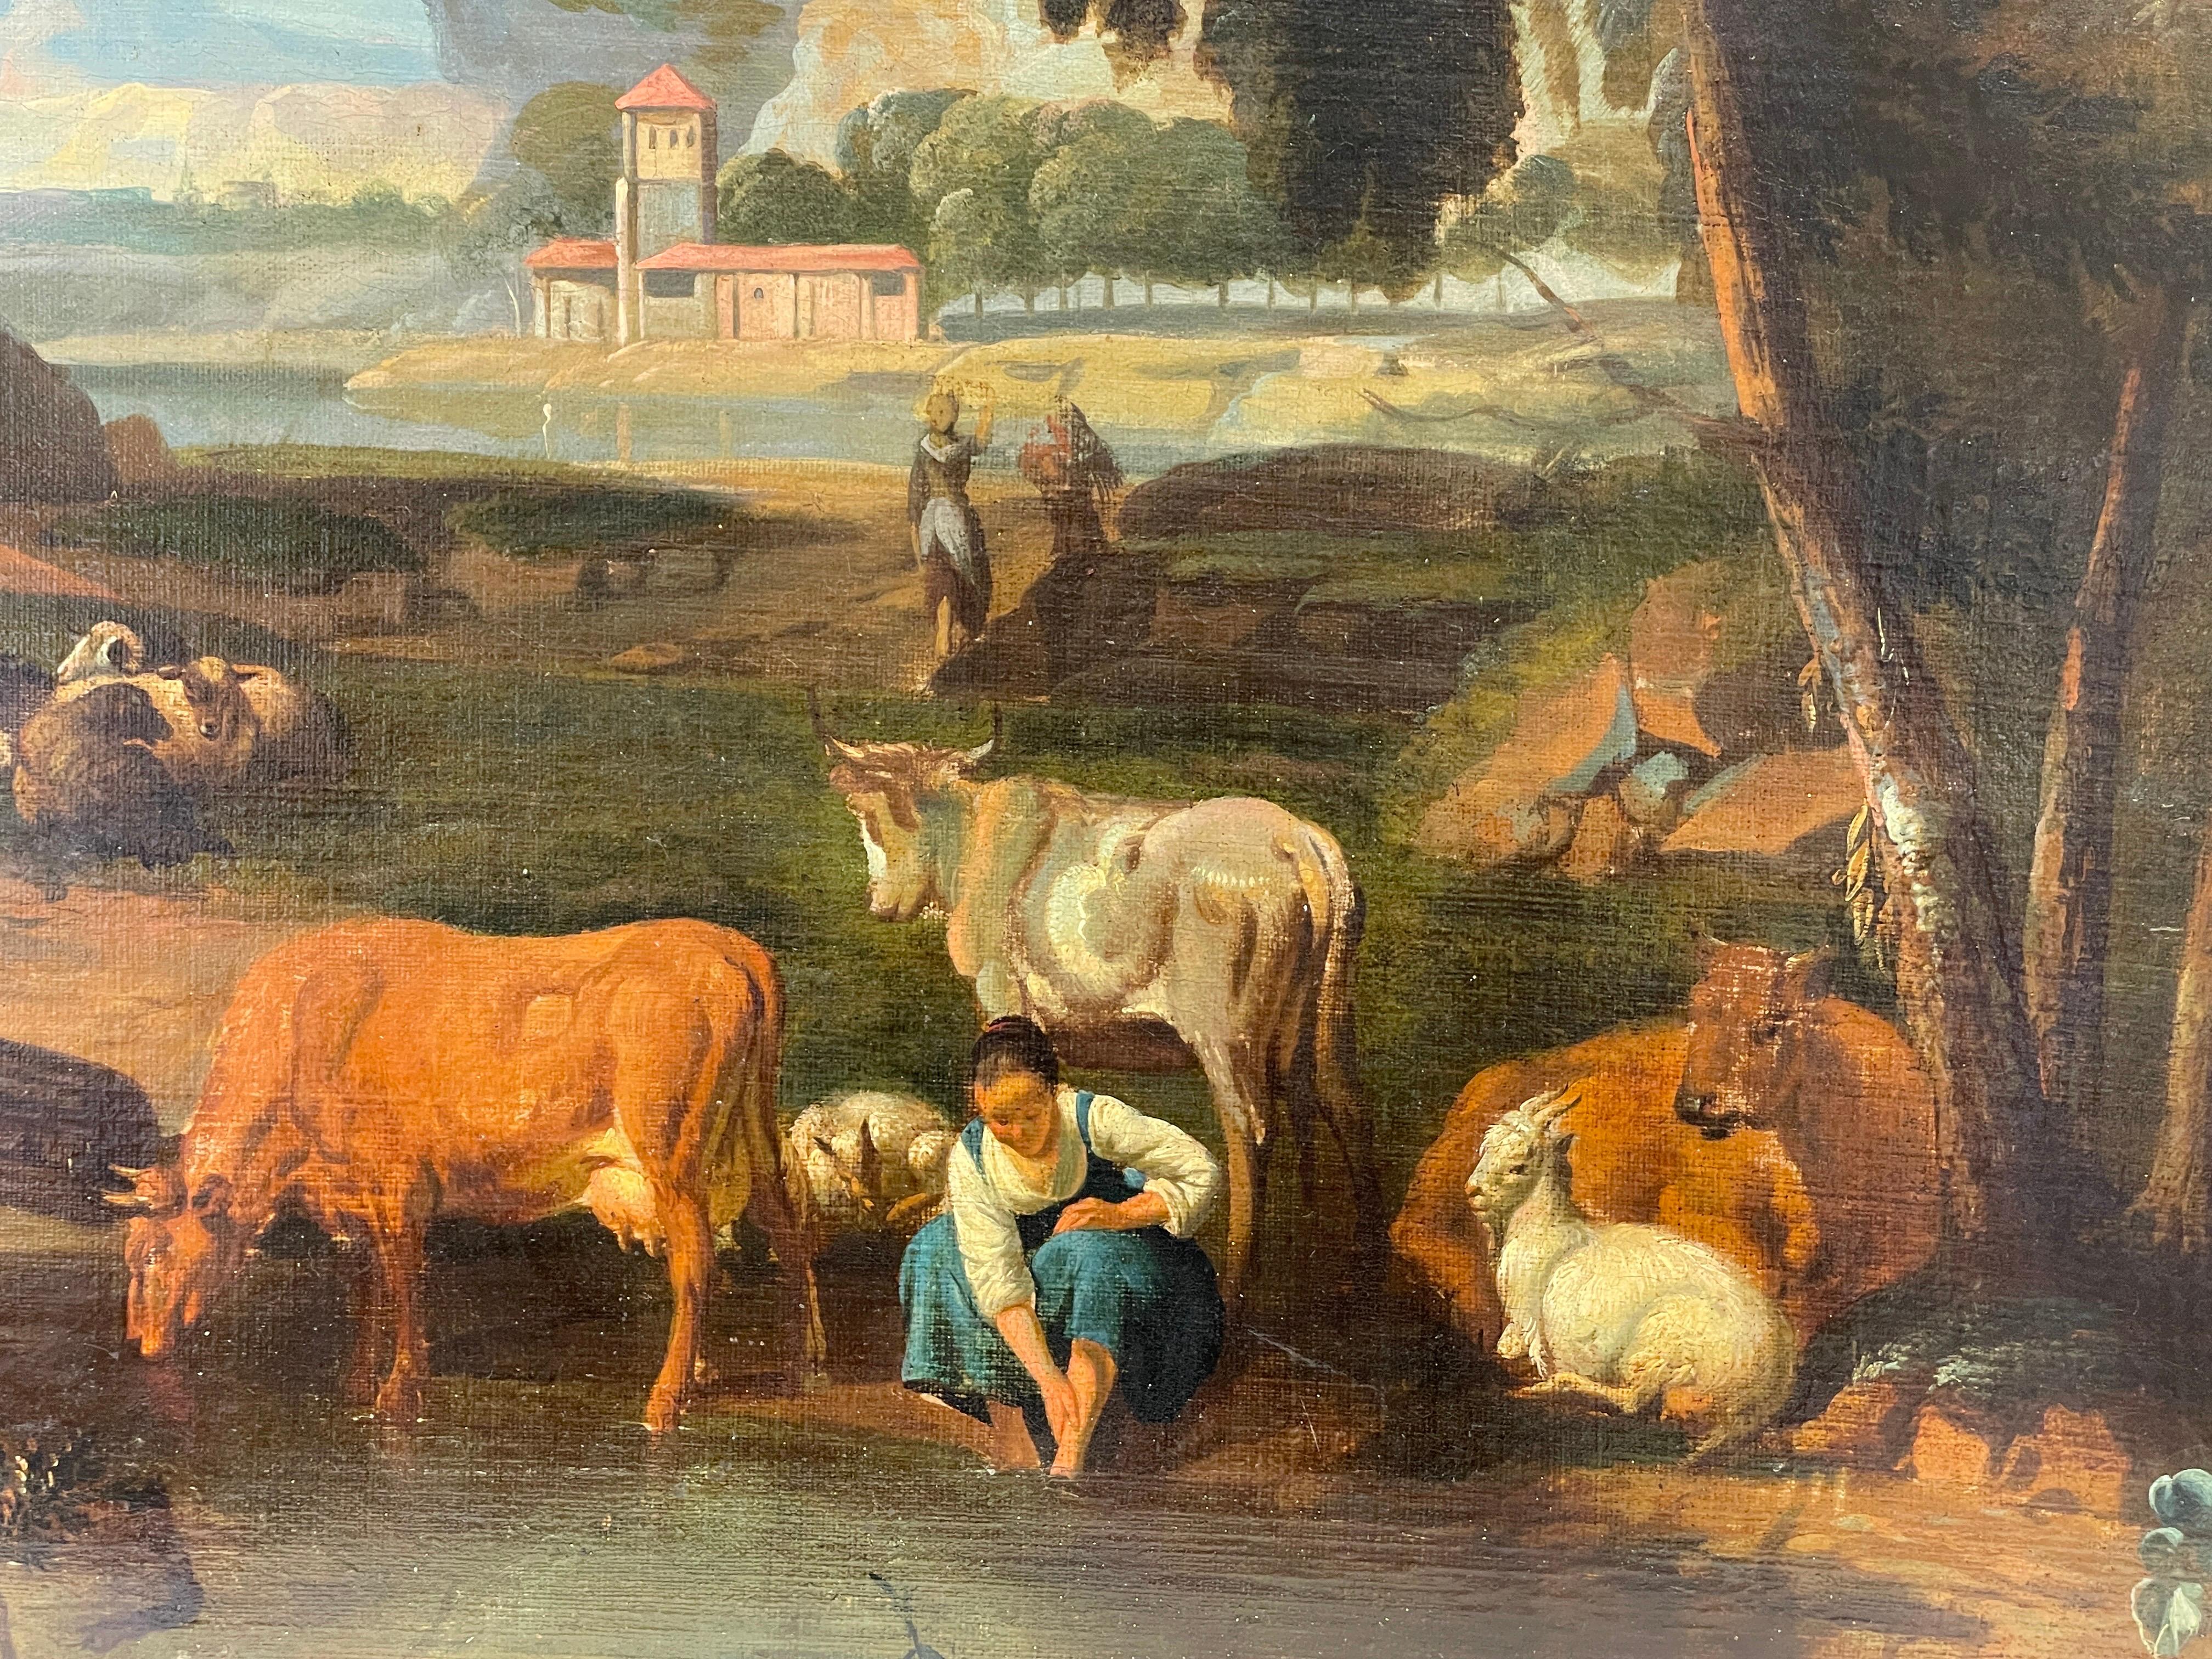 The Shepherdess
Italian School, circa 1700's
oil painting on canvas, unframed
canvas size: 25 x 31 inches
condition: relined and former restoration, very presentable and in good condition. 
Provenance: from a private collection of Old Master